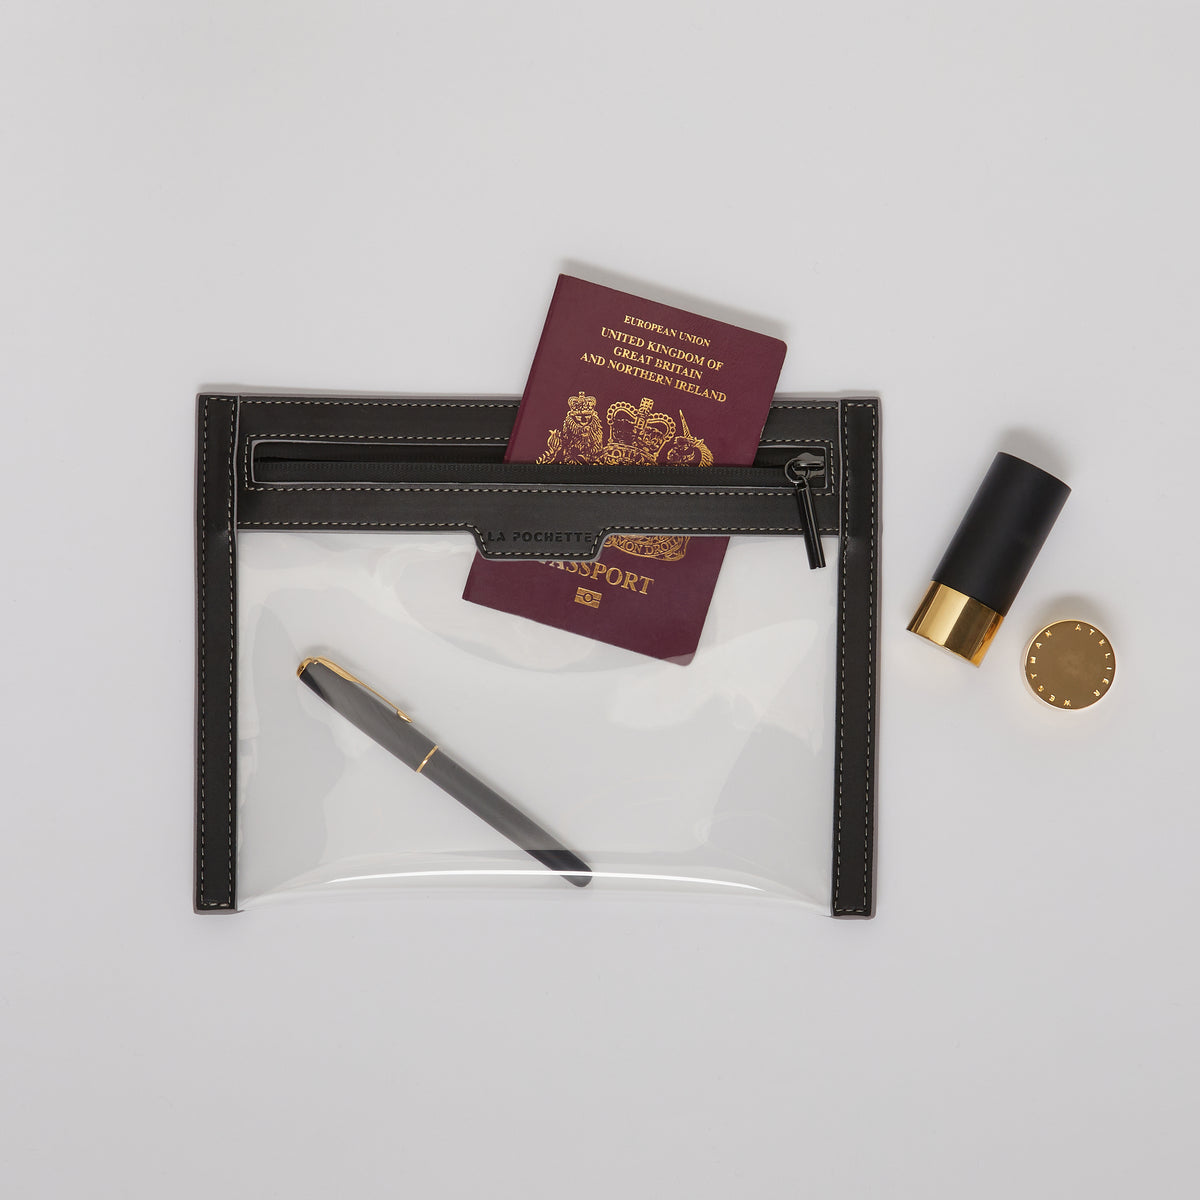 Anywhere Everywhere Wallet holding a passport and other beauty products